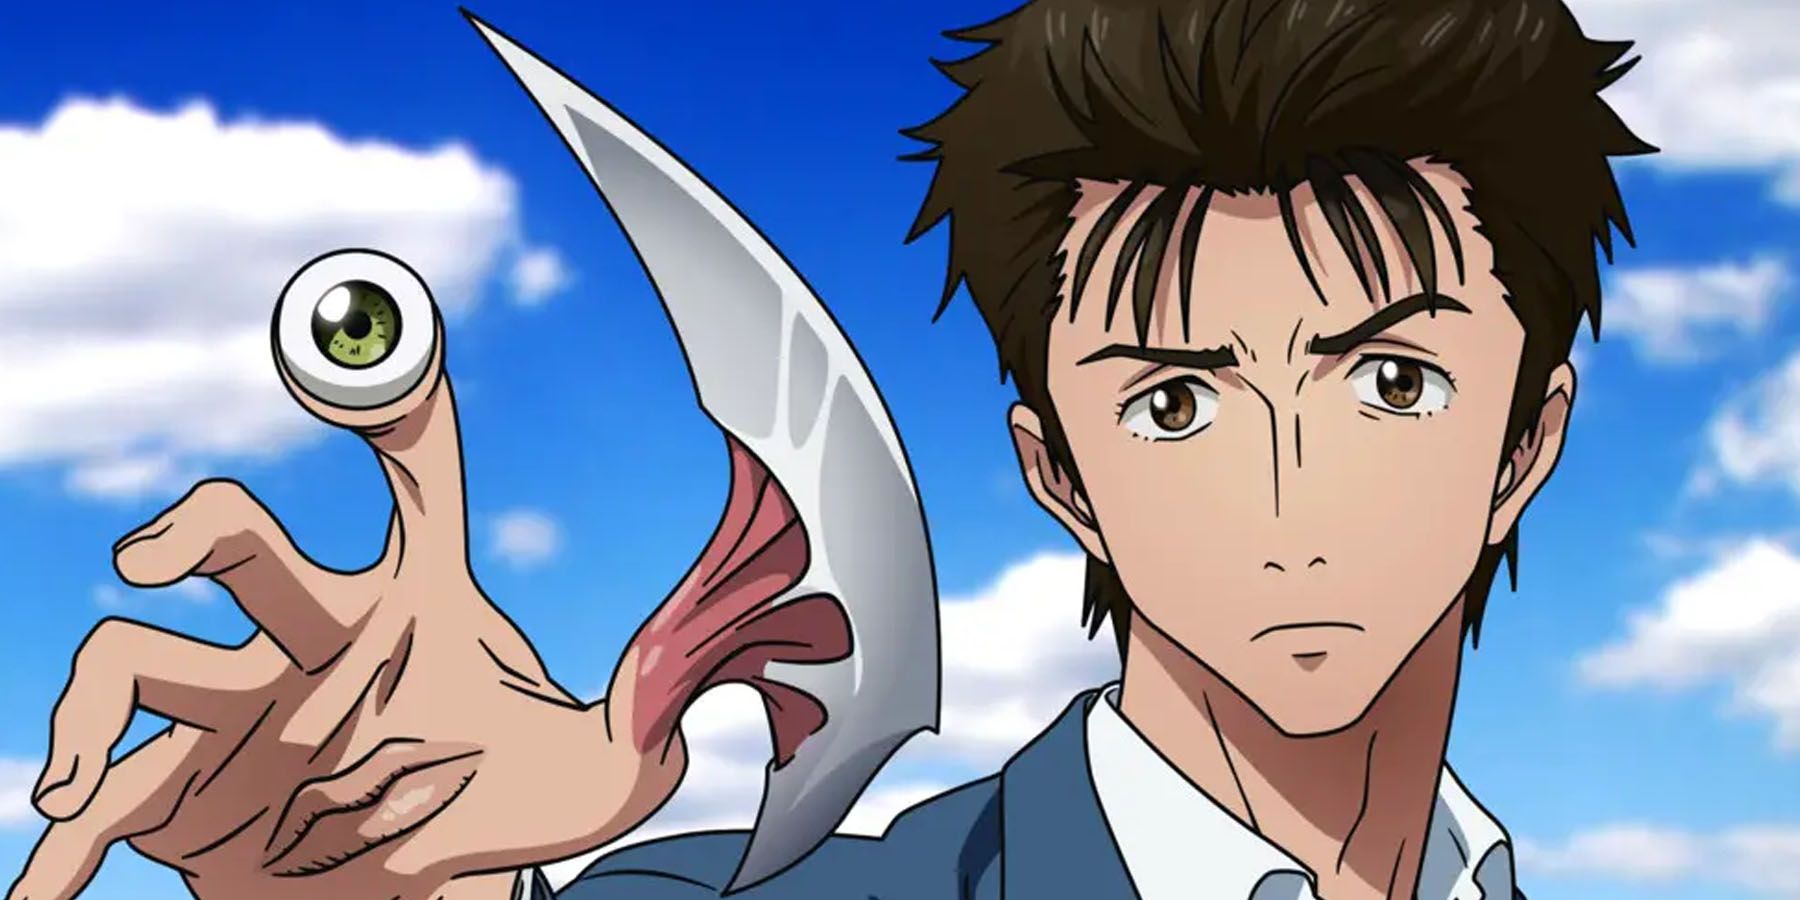 Anime Core - Parasyte live action to be released soon on Netflix | Facebook